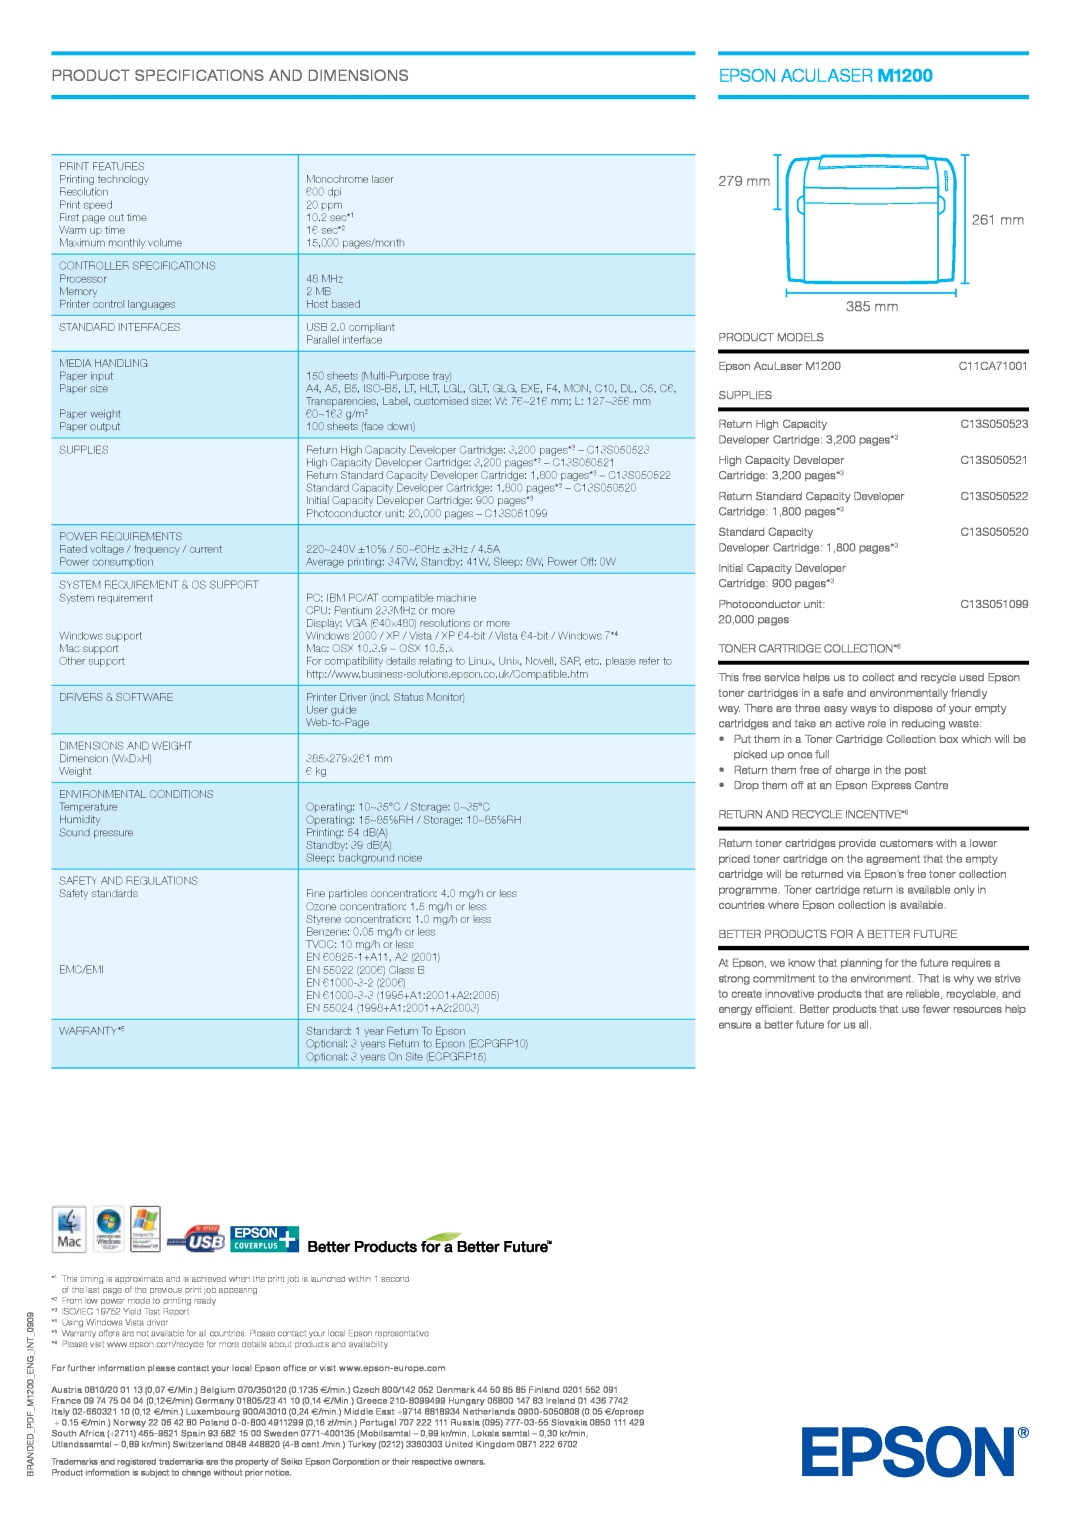 Epson manual EPSON ACULASER M1200, Product Specifications And Dimensions, 279 mm 261 mm, 385 mm 